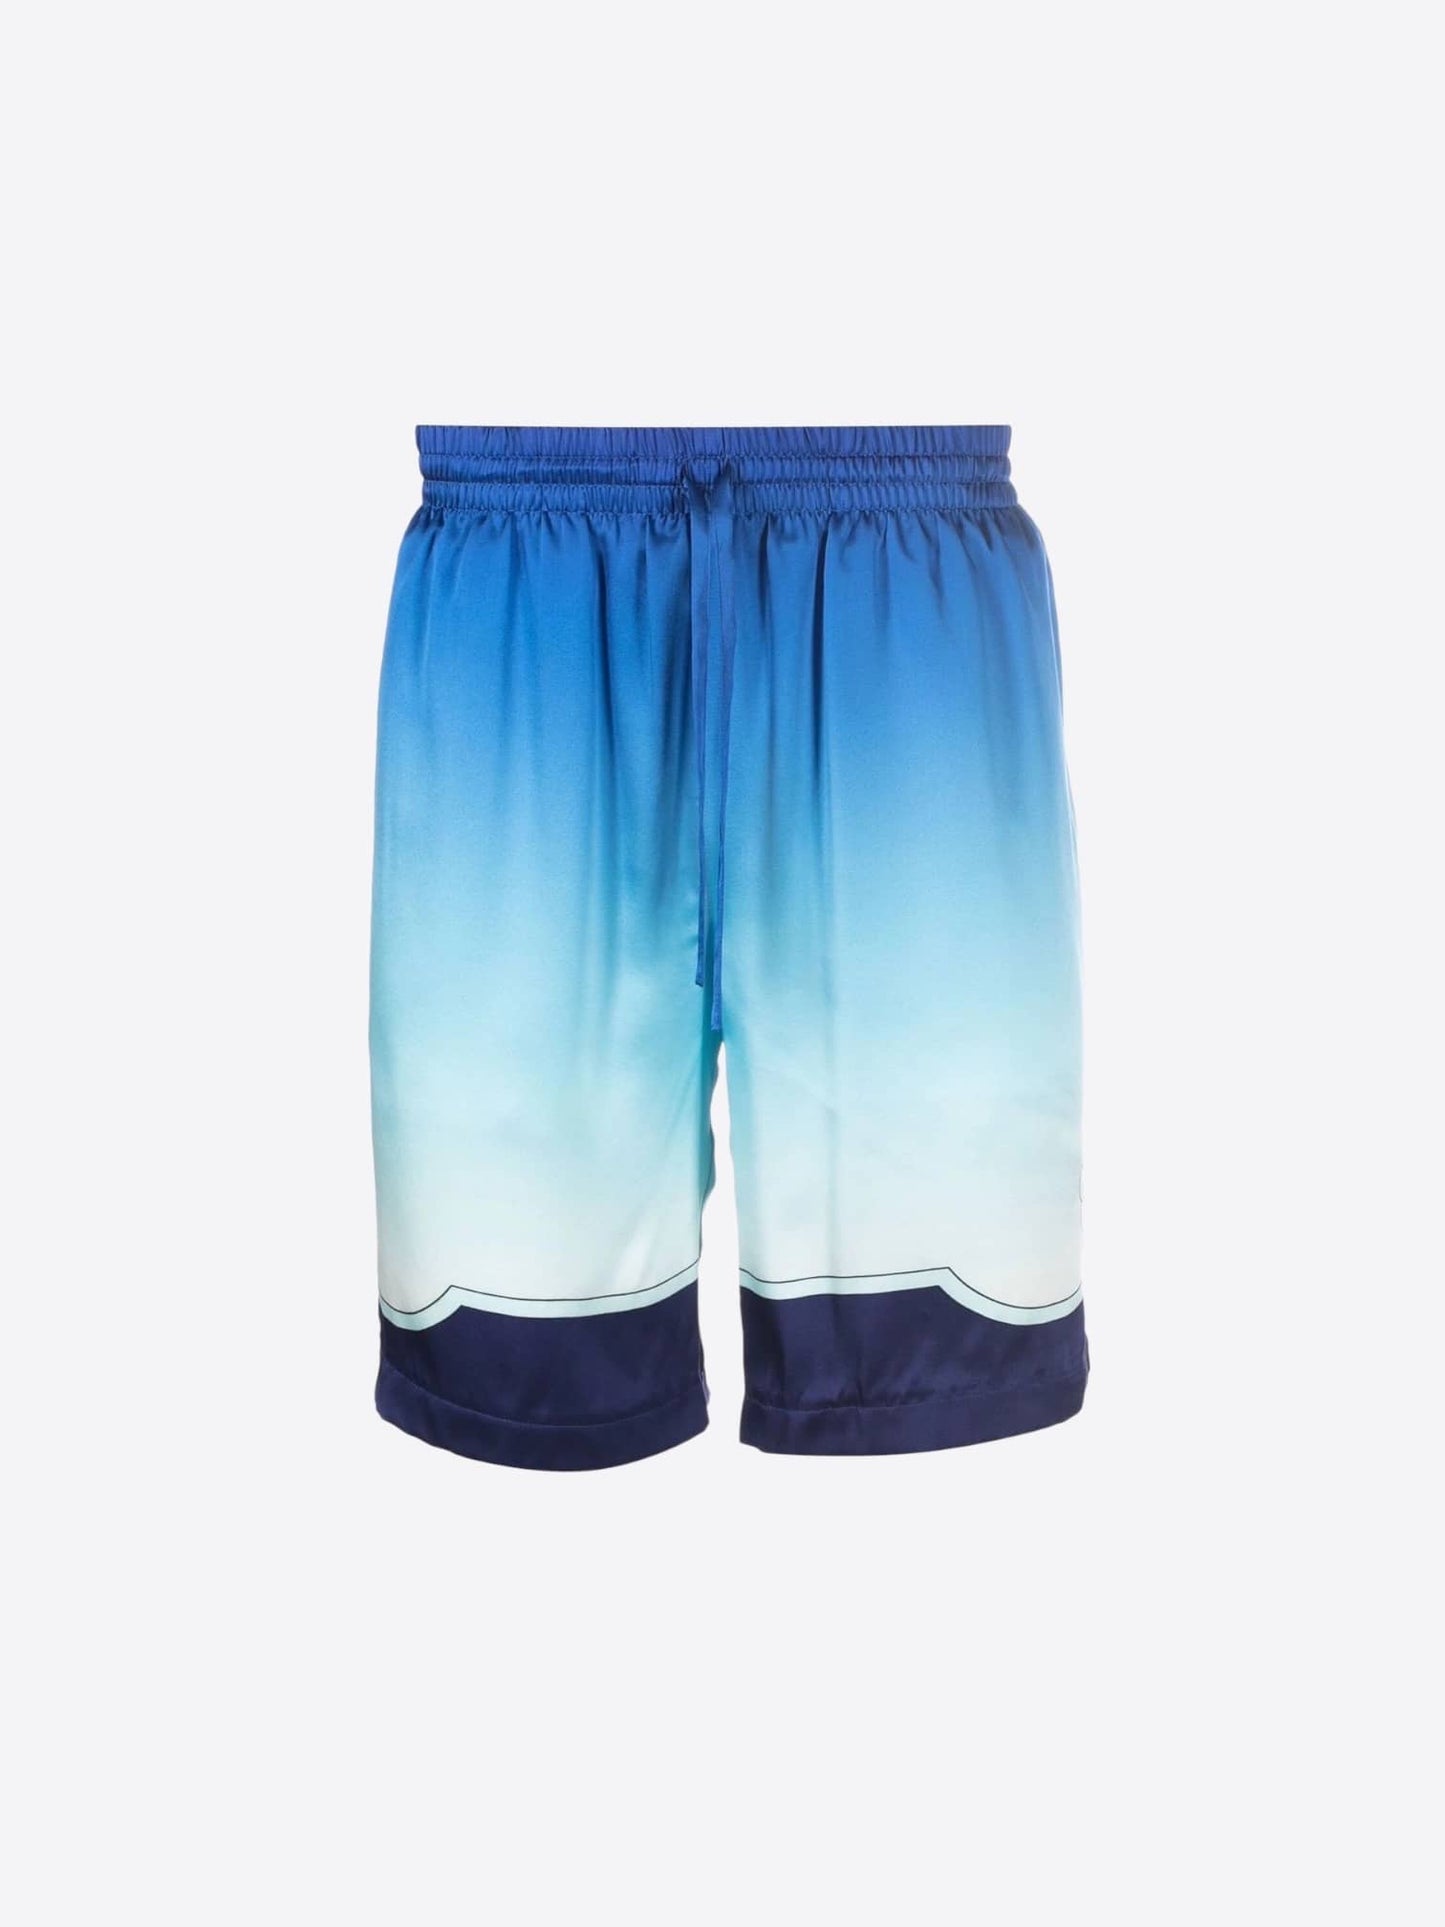 Archway Place Vendome Silk Shorts